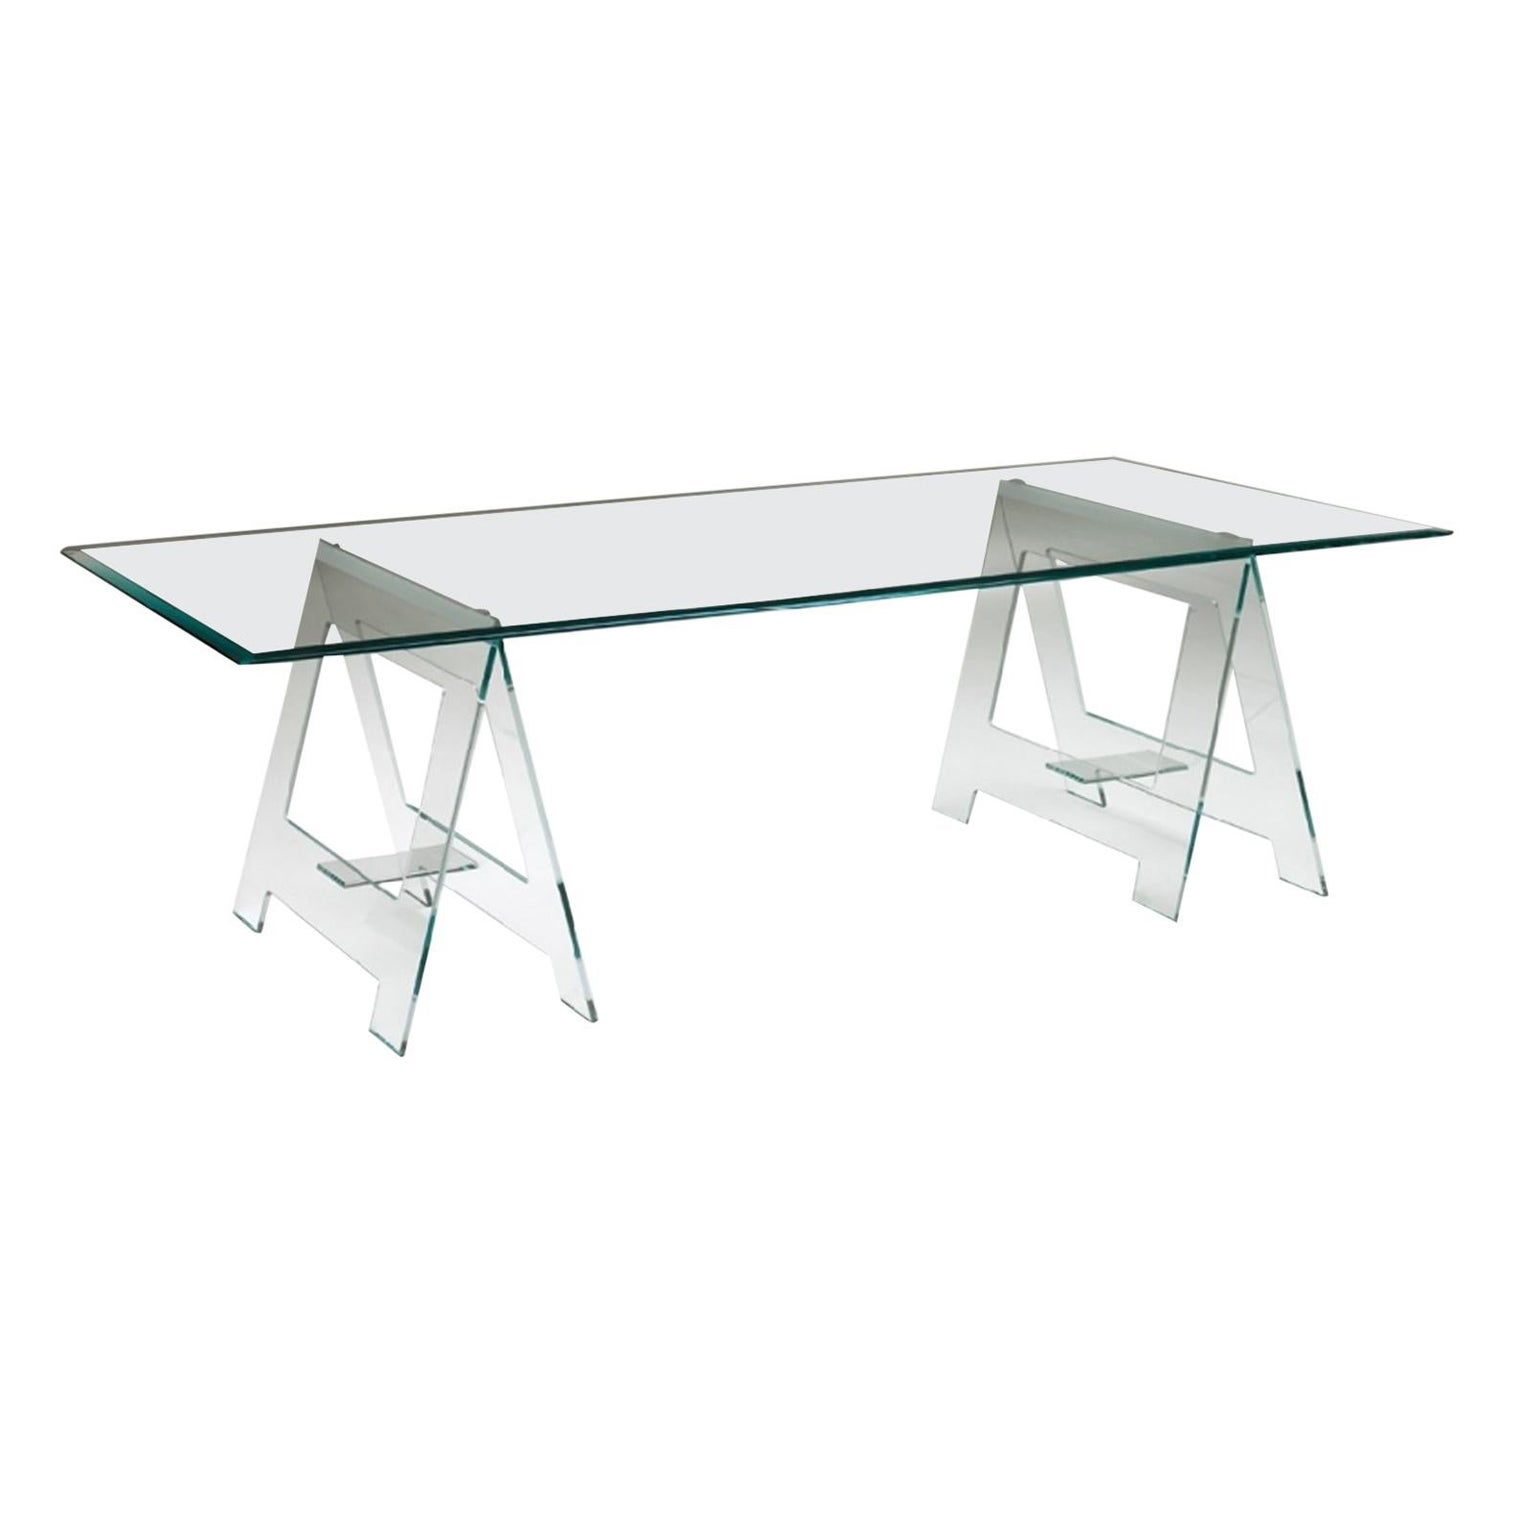 21st Century Italian Modern Design Crystal Desk or Dining Table with Easels